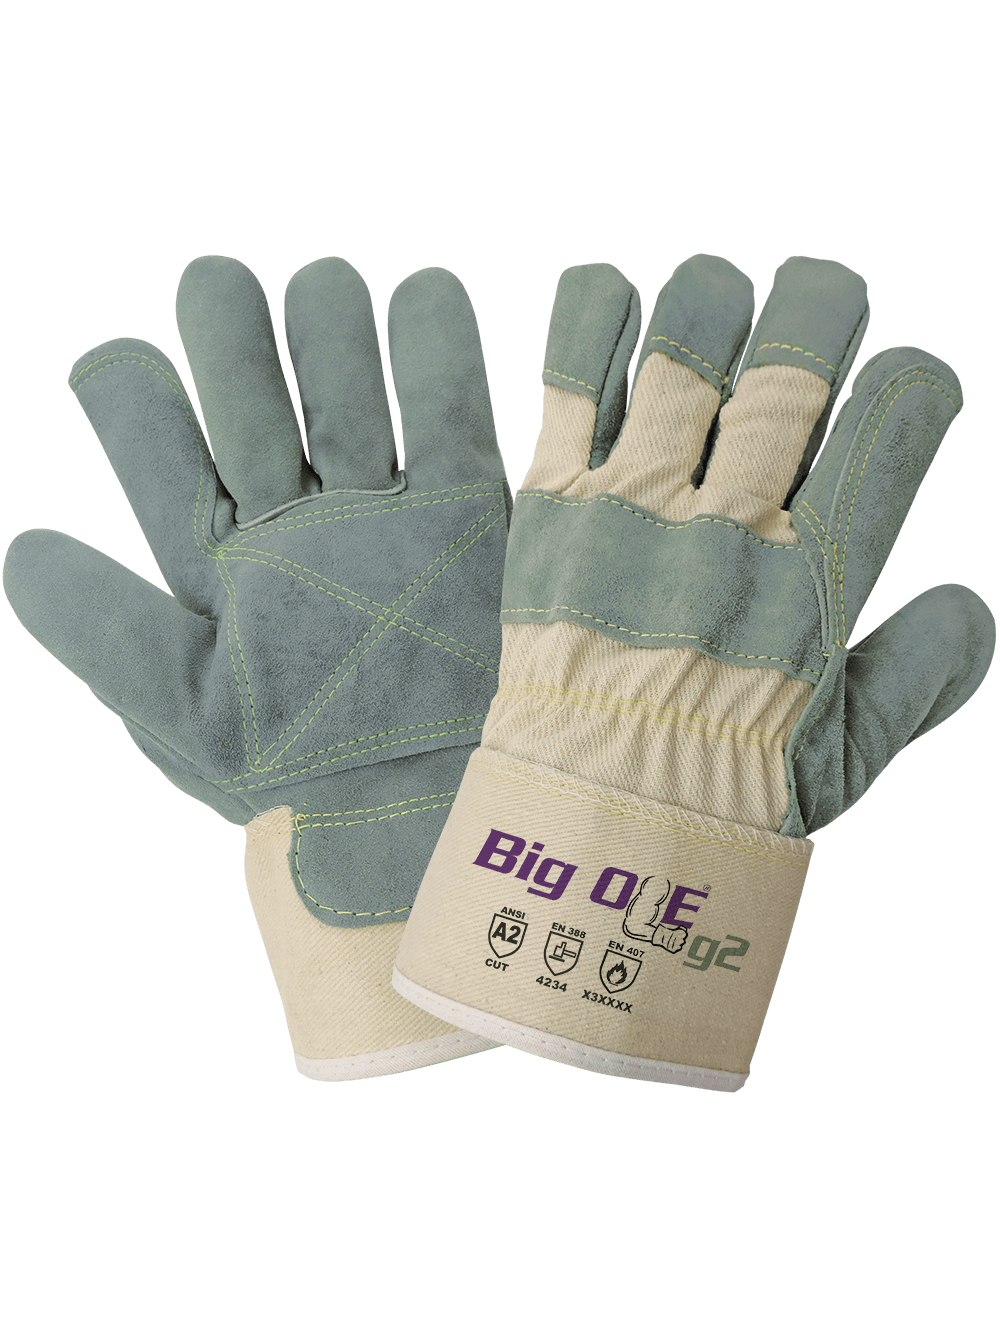 Big Ole® g2 Premium Top-Grade Side Select Split Cowhide Leather Palm Cut and Heat Resistant Gloves - 2000DP